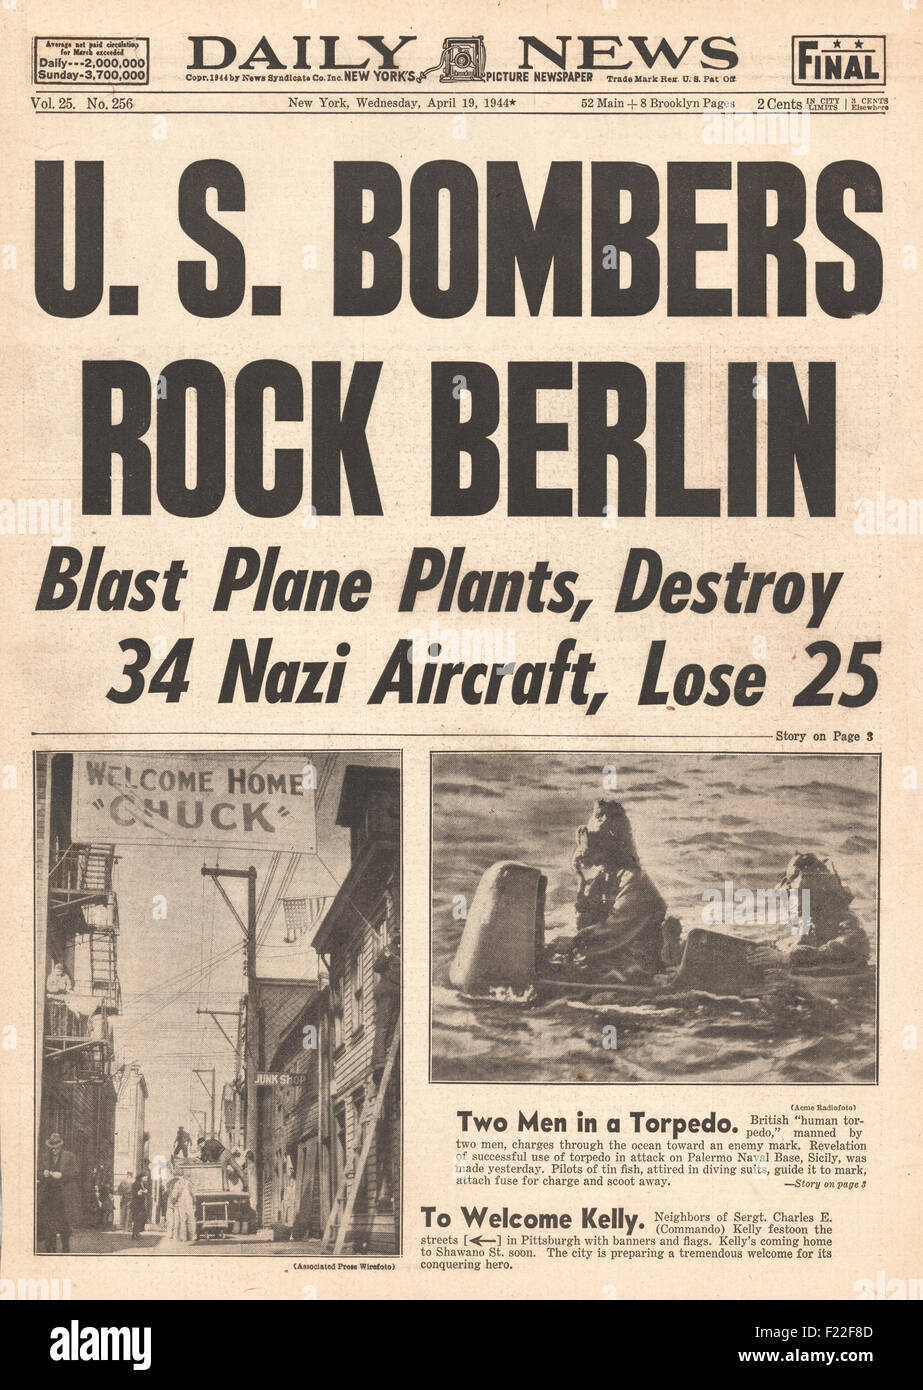 1944 Daily News front page reporting U.S. Airforce Bombs Berlin Stock Photo